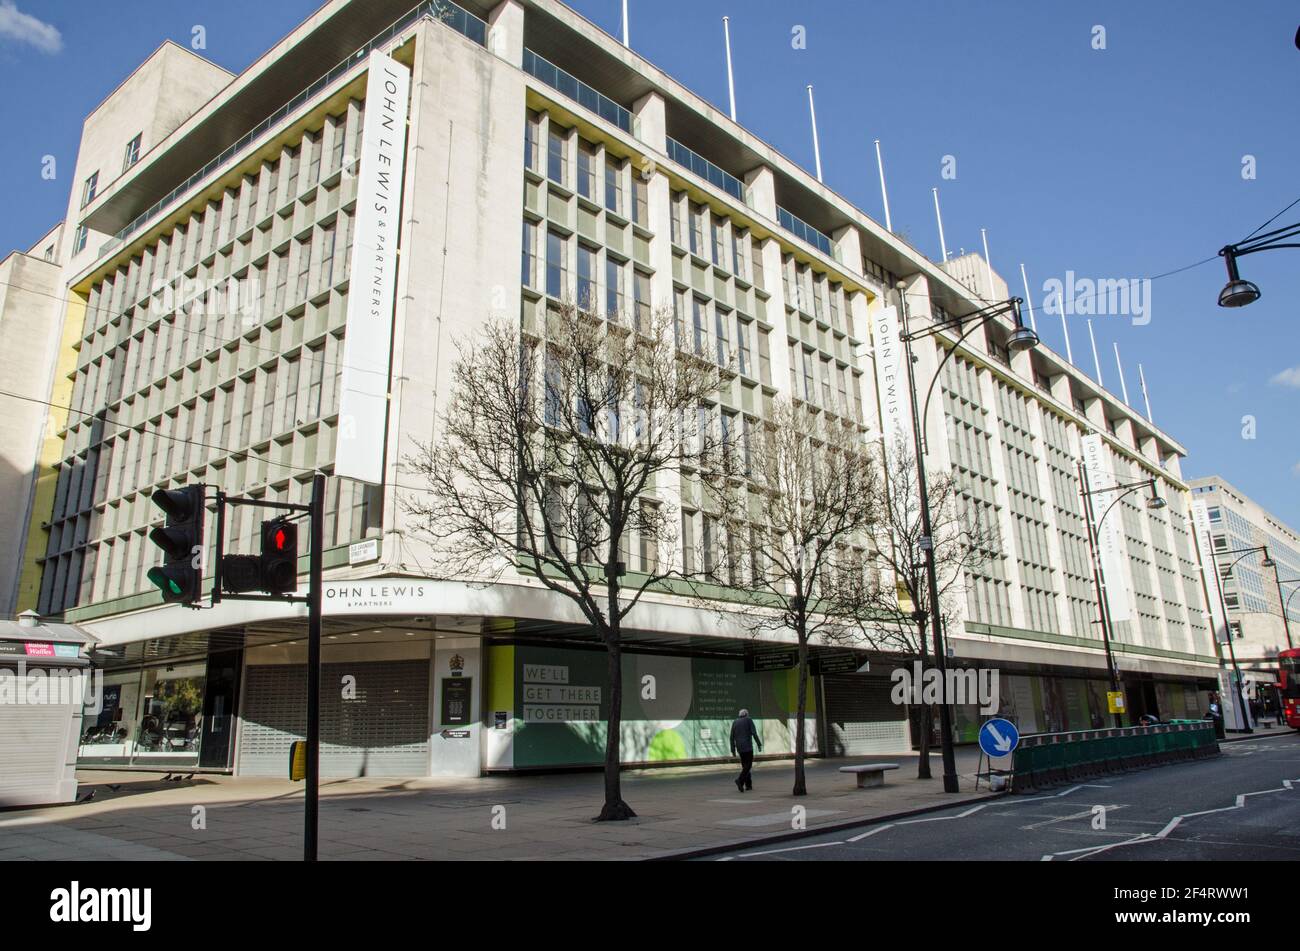 London, UK - February 26, 2021: The flagship department store of the John Lewis chain on Oxford Street, central London.  Closed due to COVID-19 lockdo Stock Photo